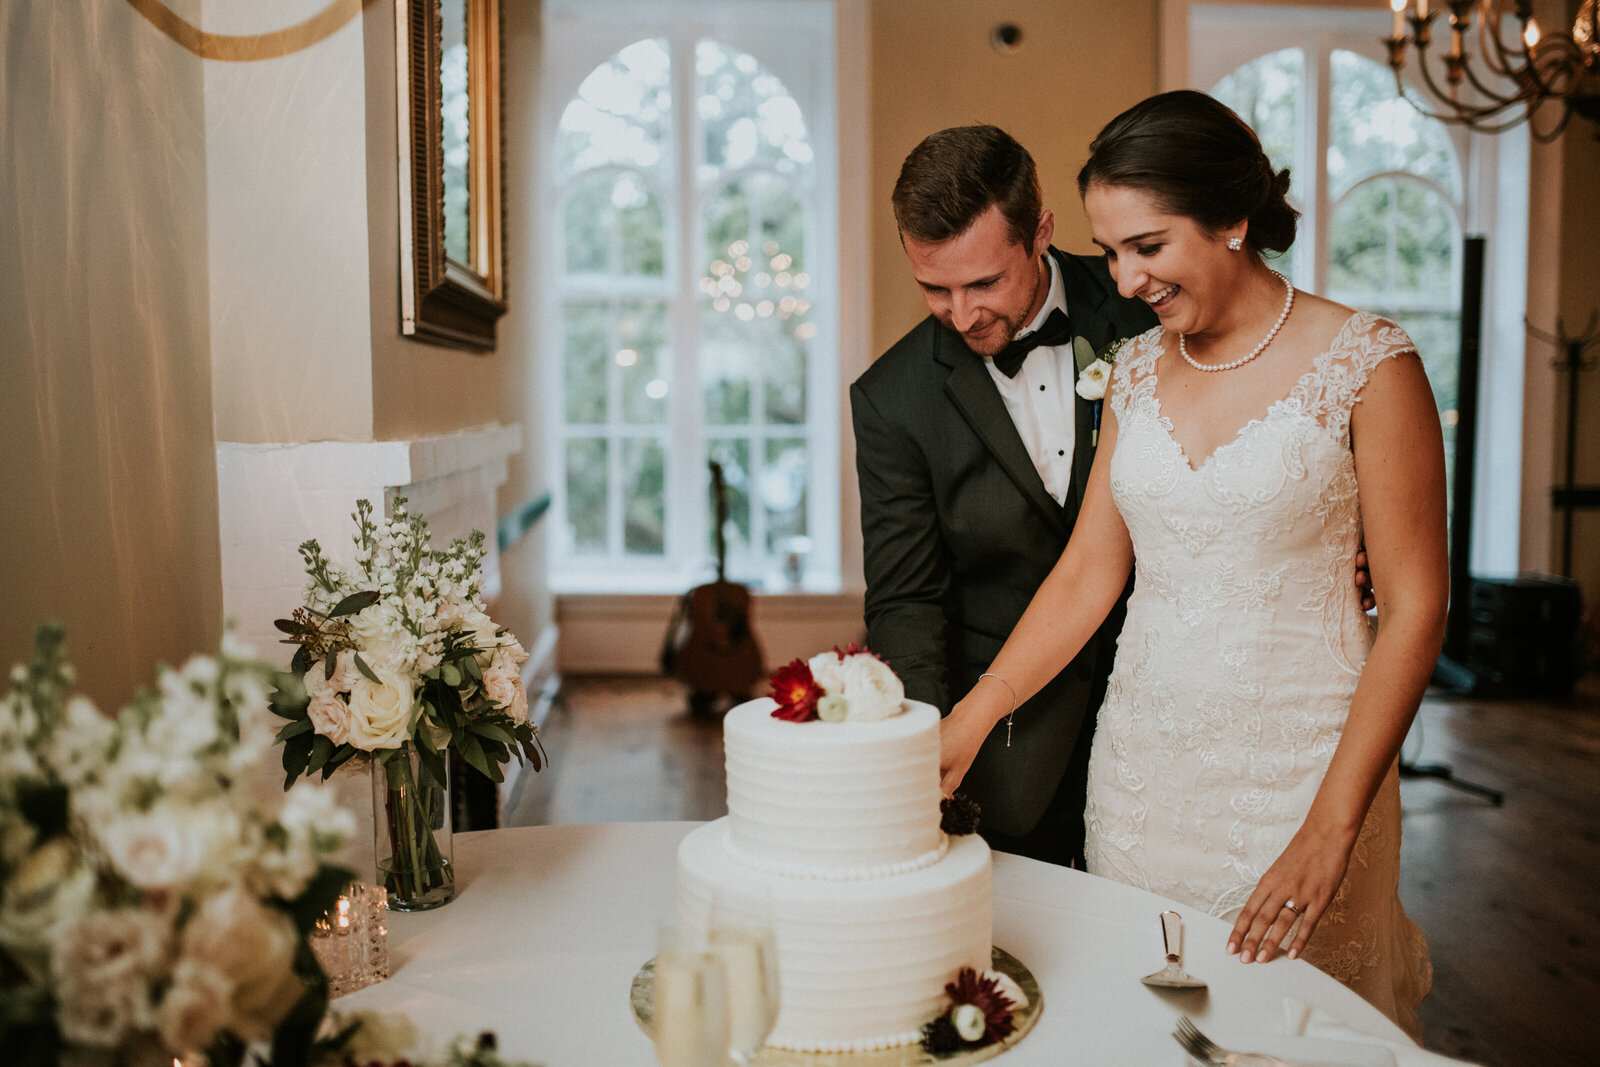 Couple cutting the cake at a wedding in Savannah